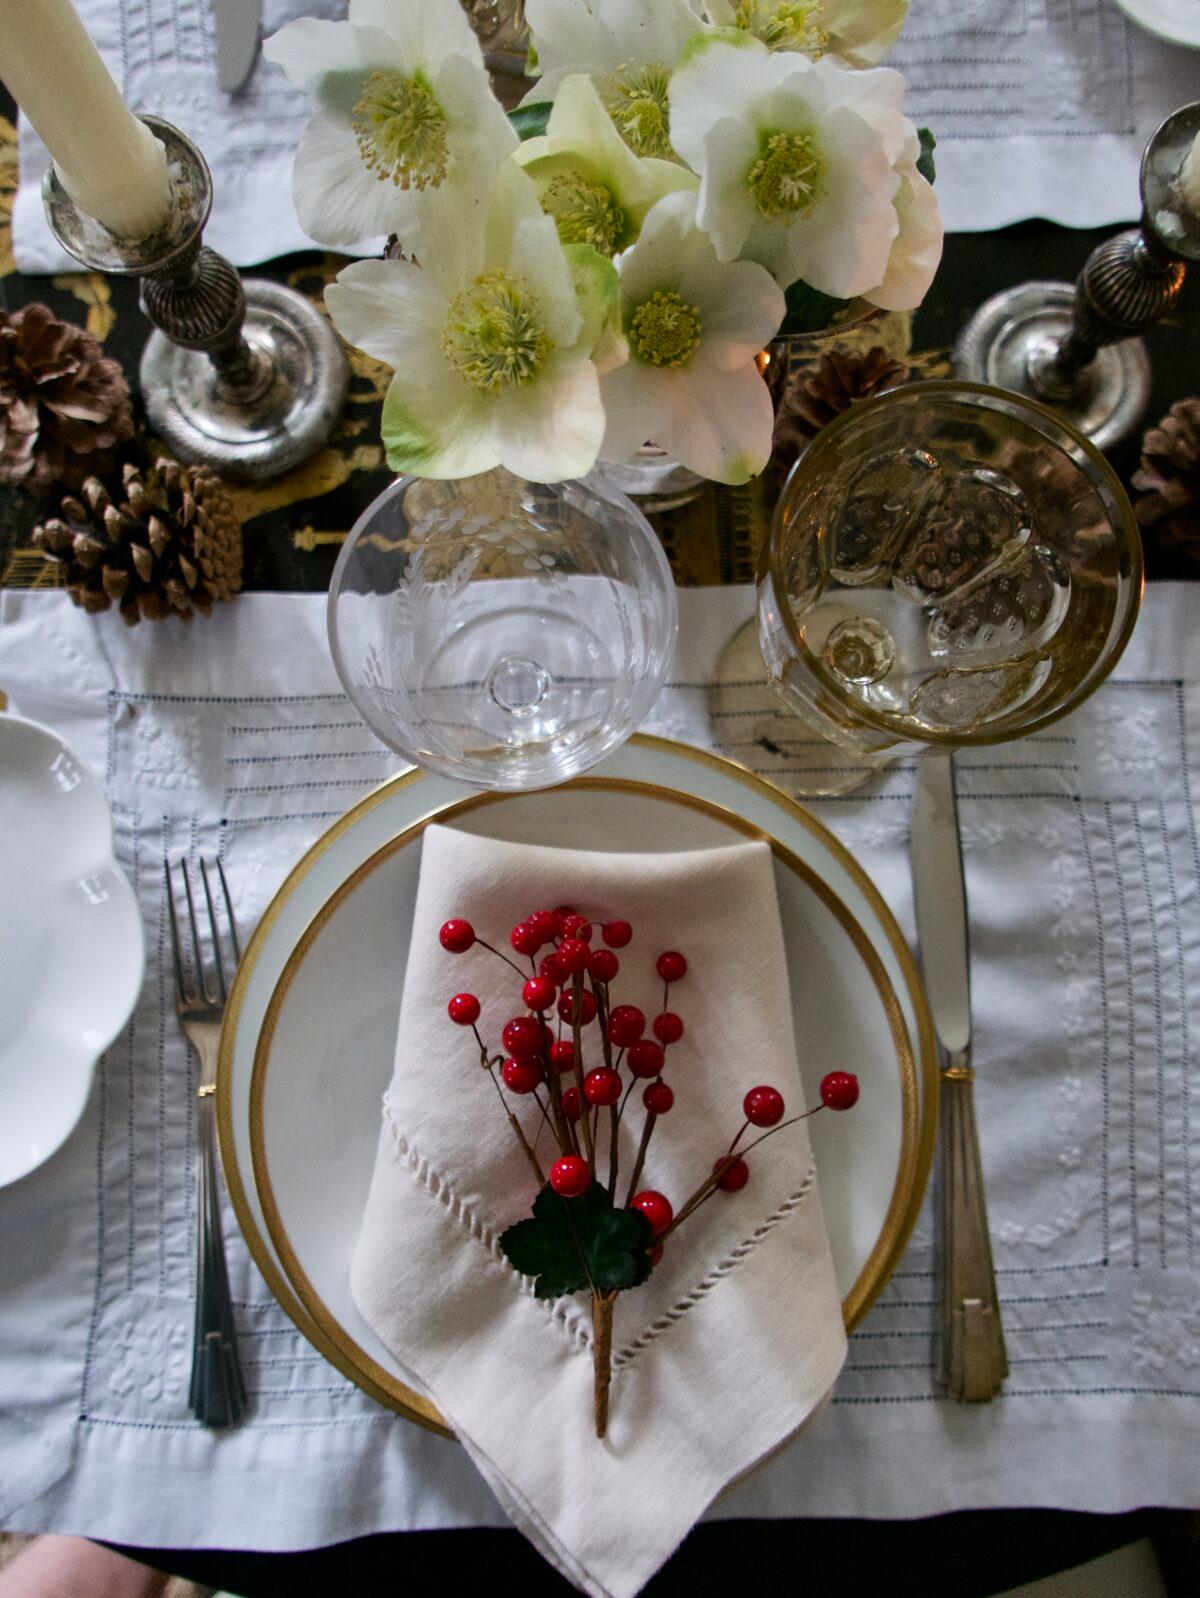 On the table: Pinecones and red berries play with white hellebores, silver and gold add a bit of glimmer and glow, and white linens add an understated elegance. (Victoria de la Maza)